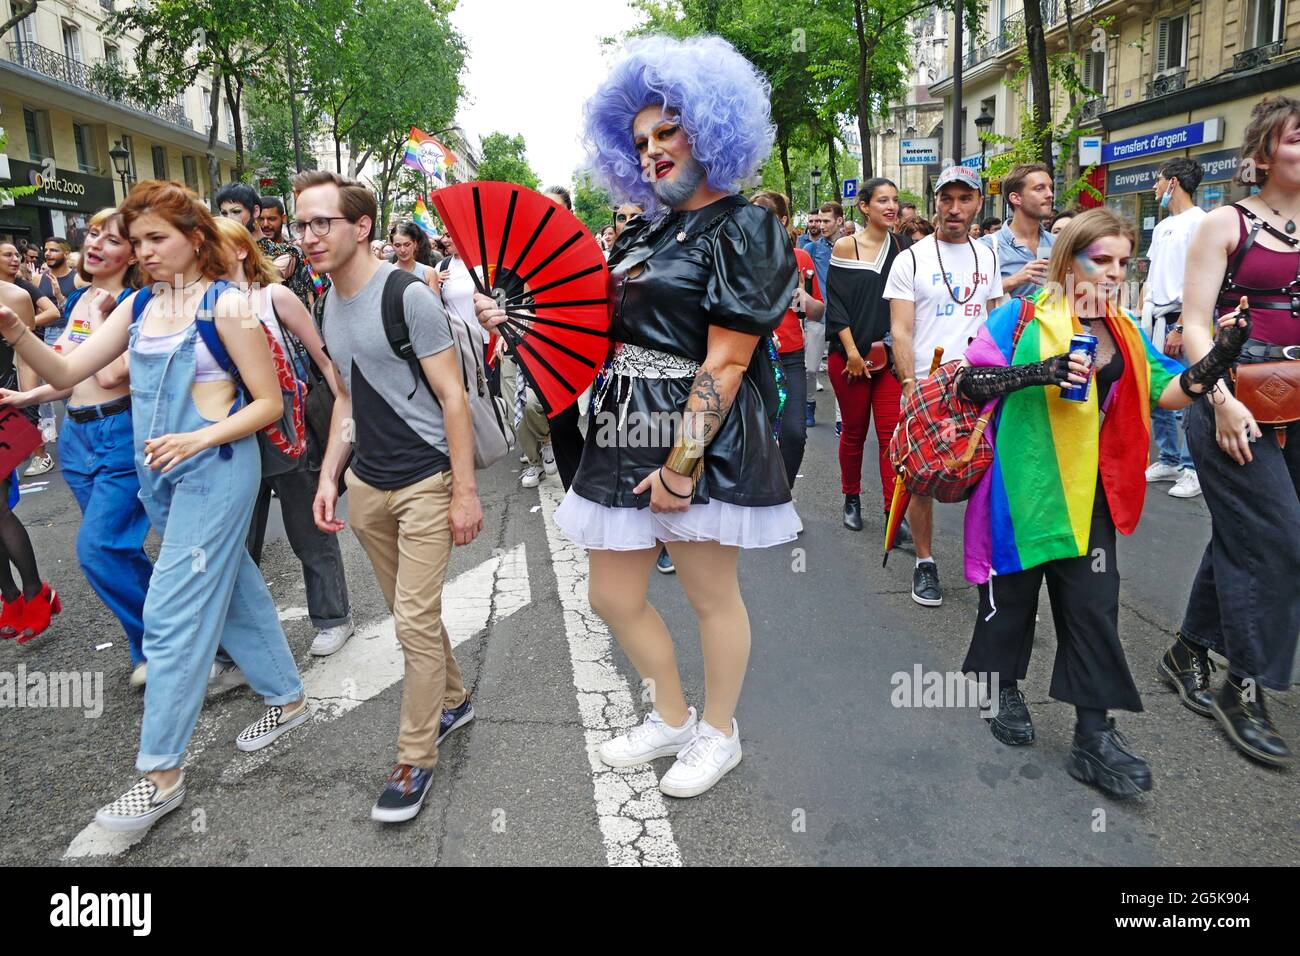 A famous French Drag Queen, The Big Bertha poses for a photo during the Gay Pride March in Paris. Thousands of LGBT members and their supporters took part in the Gay Pride March in Paris to celebrate Pride Month. (Photo by Gregory Herpe / SOPA Images/Sipa USA) Stock Photo